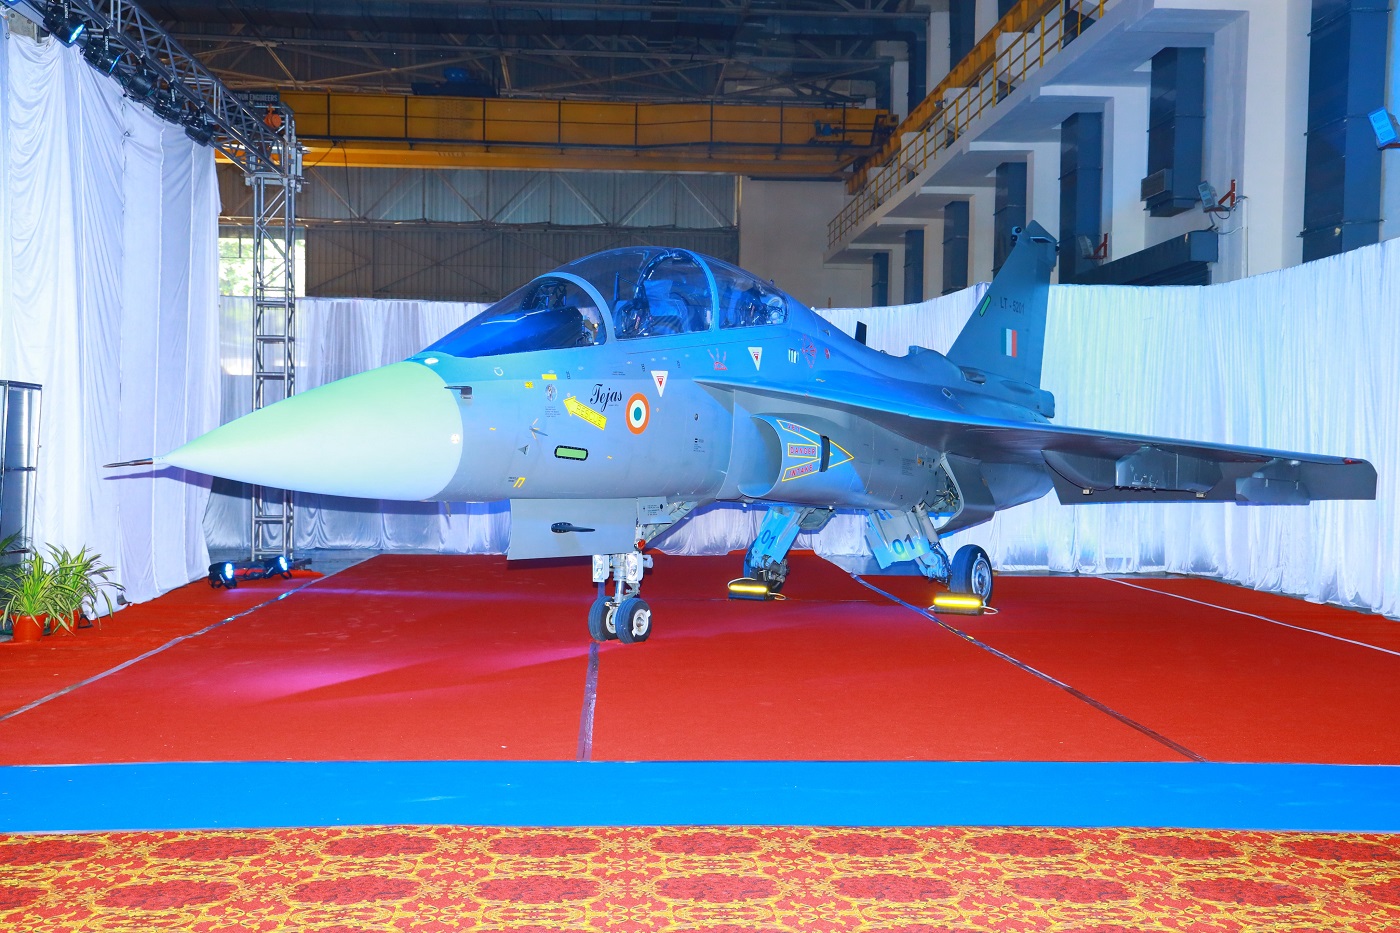 Hindustan Aeronautics Limited Delivers First LCA Tejas Twin Seater to Indian Air Force